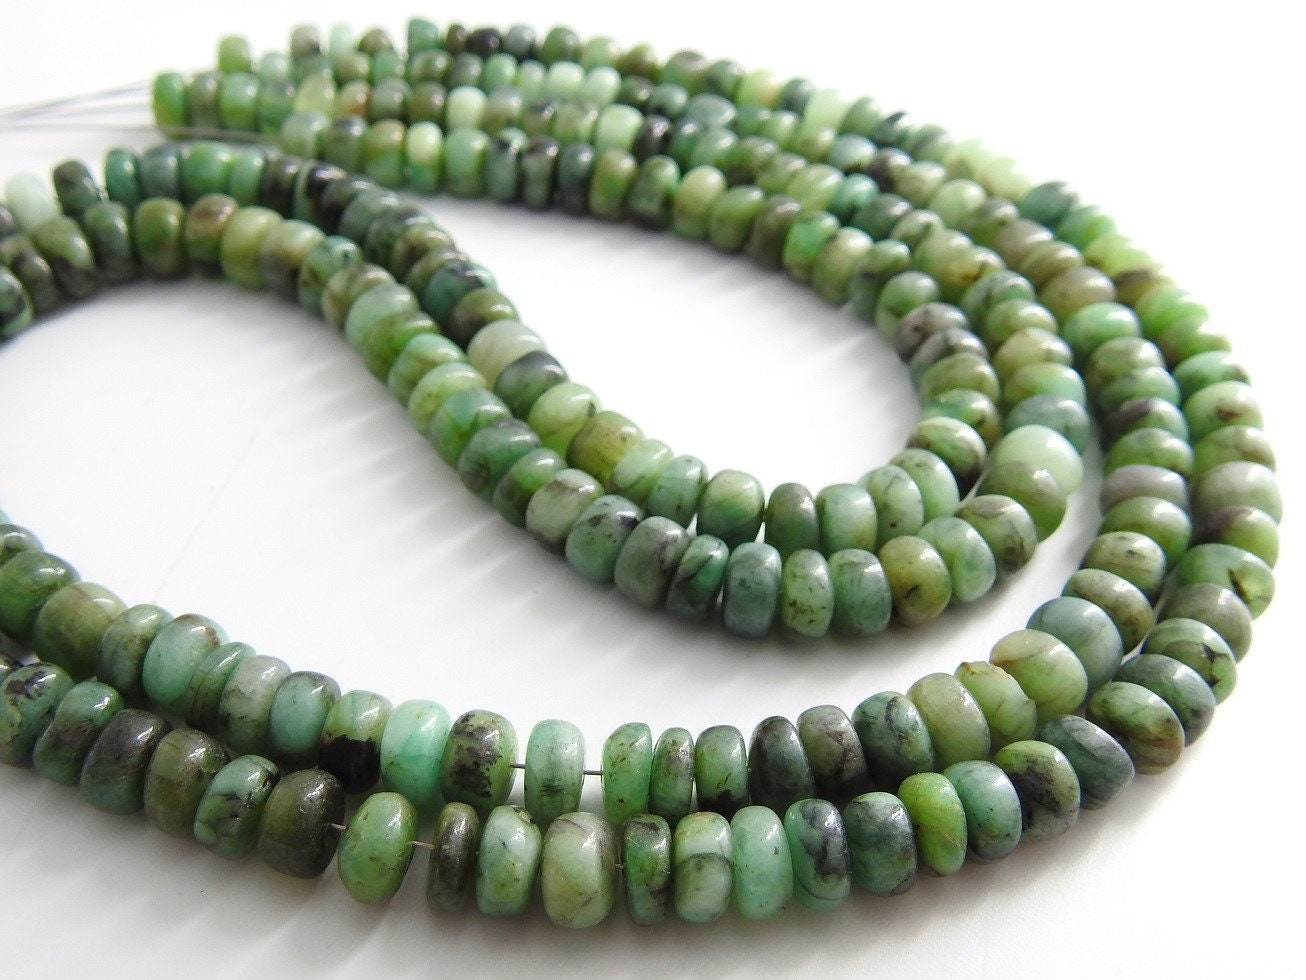 Emerald Smooth Roundel Bead,Shaded,Loose Stone,Handmade,Wholesale Price,New Arrival,18Inch Strand 100%Natural PME(B12) | Save 33% - Rajasthan Living 19